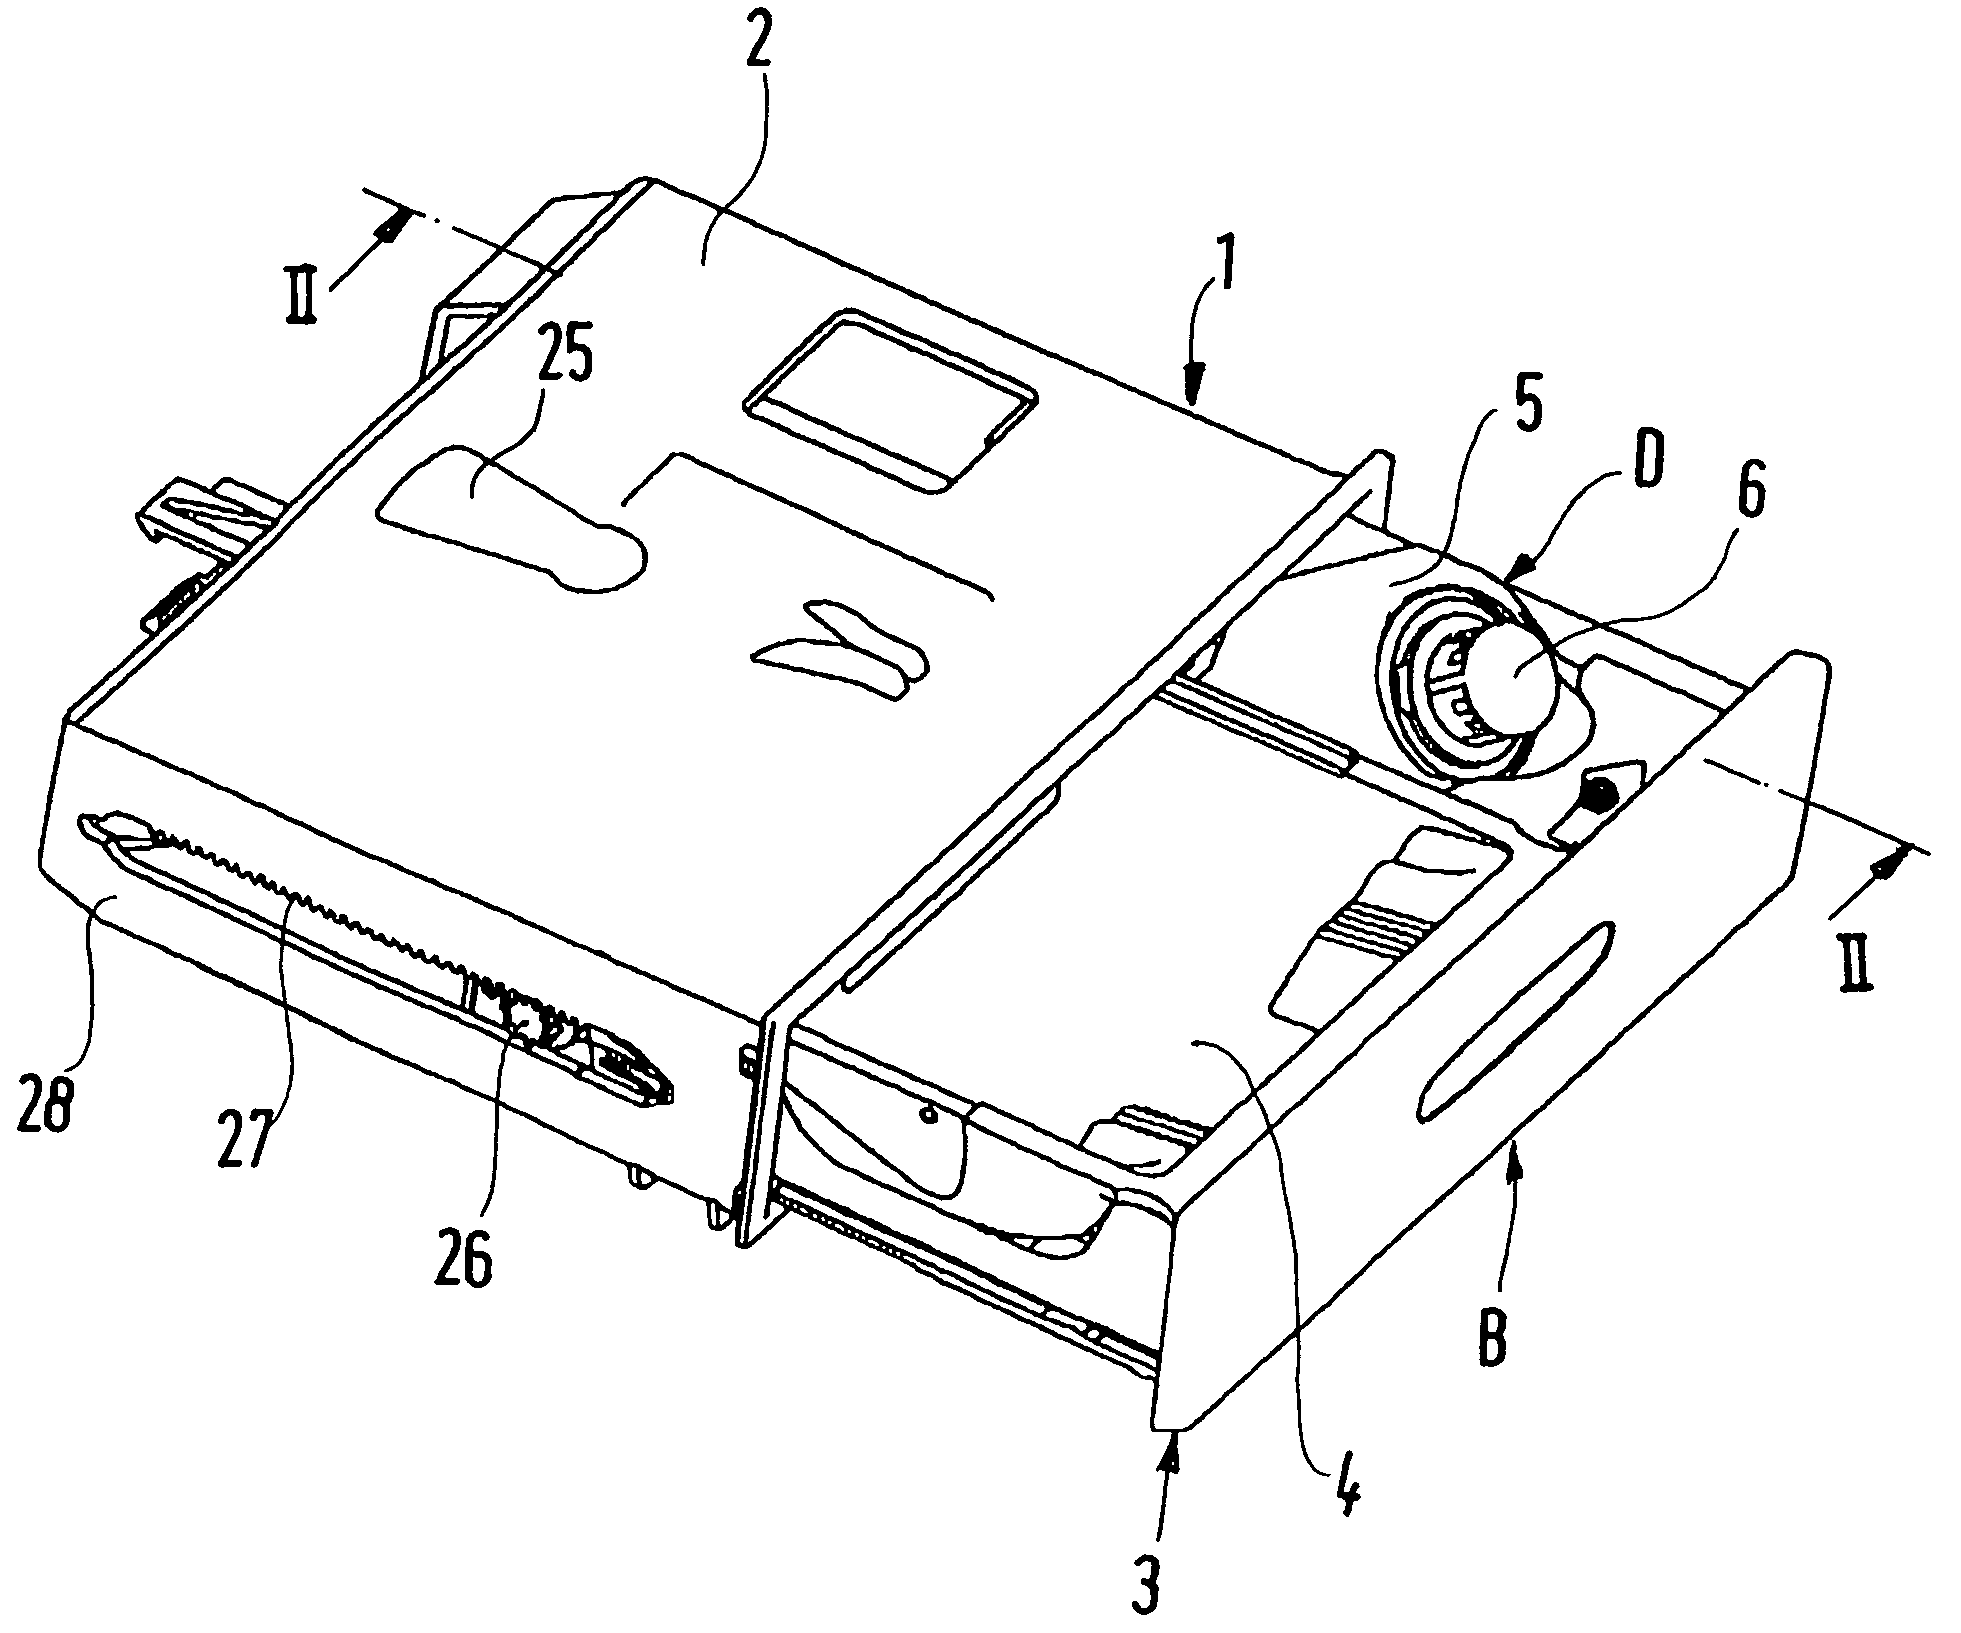 Built-in ashtray for a motor vehicle and method of making same